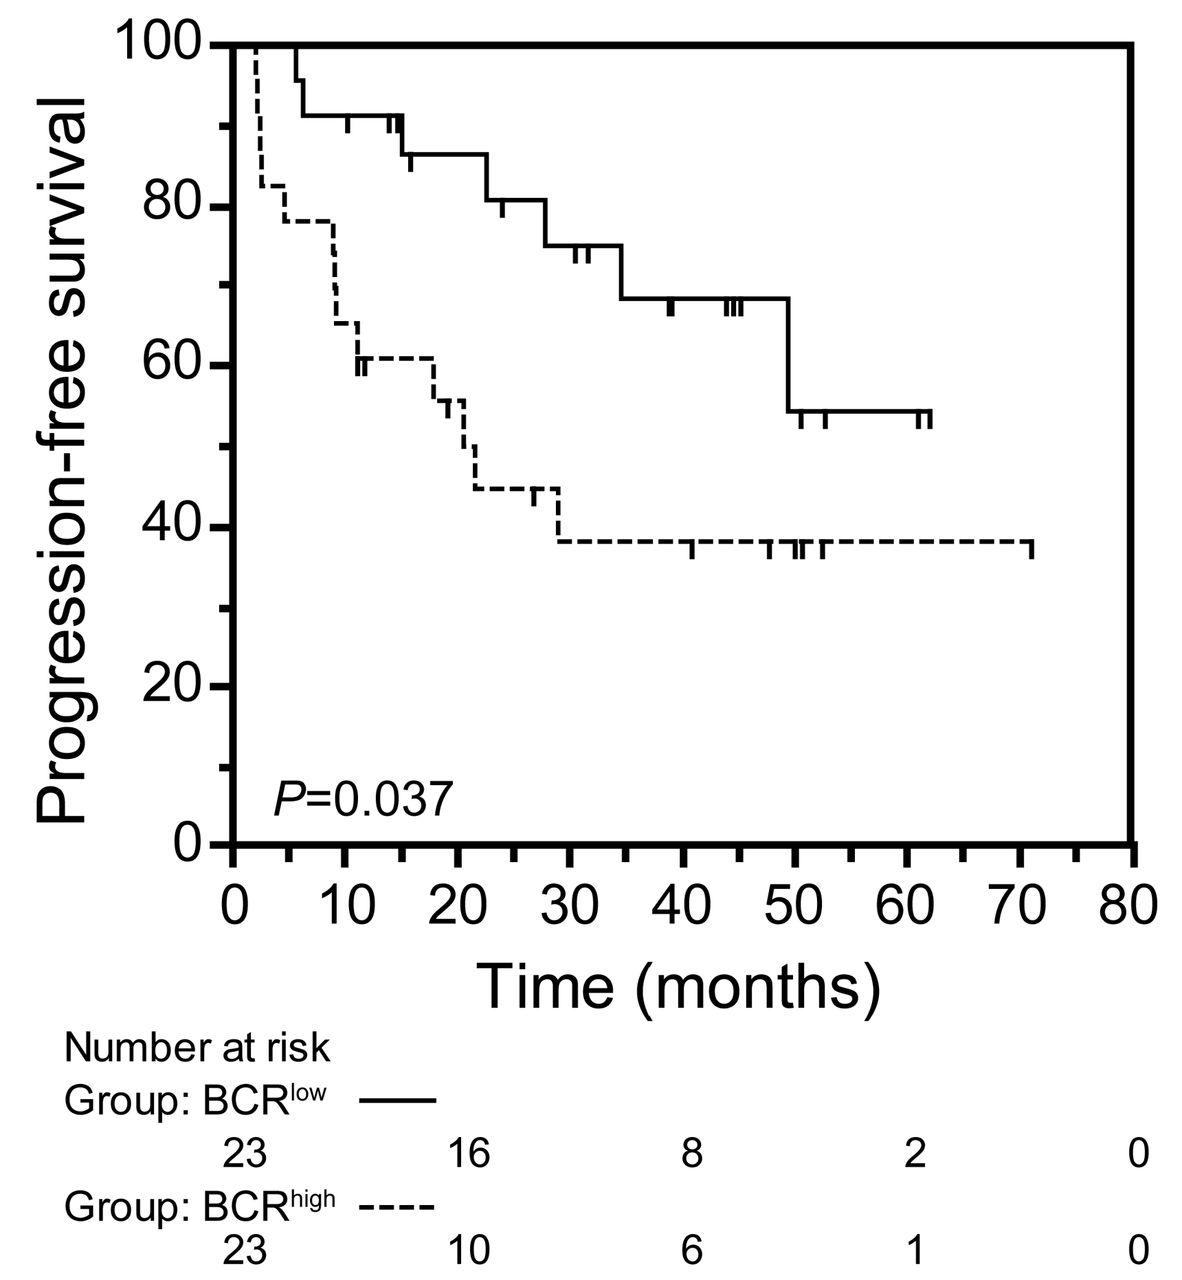 A B Cell Receptor Related Gene Signature Predicts Survival In Mantle Cell Lymphoma Results From The Fondazione Italiana Linfomi Mcl 08 Trial Haematologica